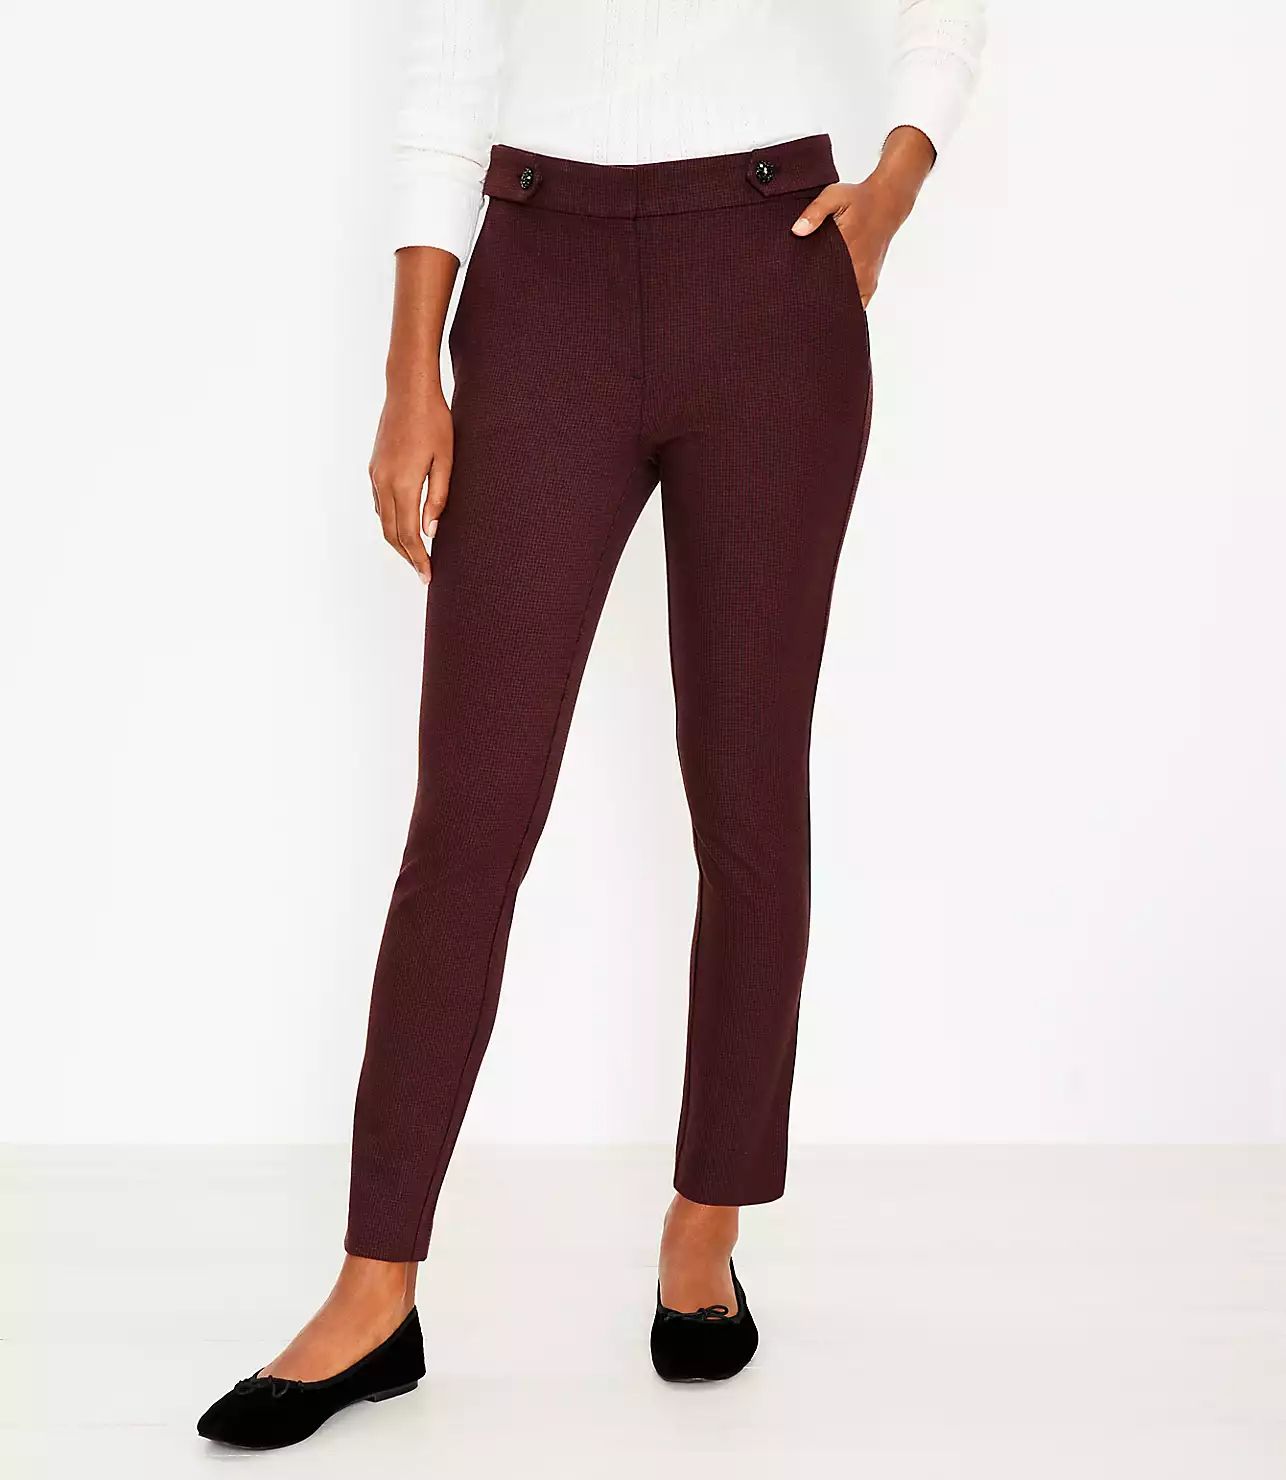 Button Tab Perfect Skinny Pants in Houndstooth | LOFT